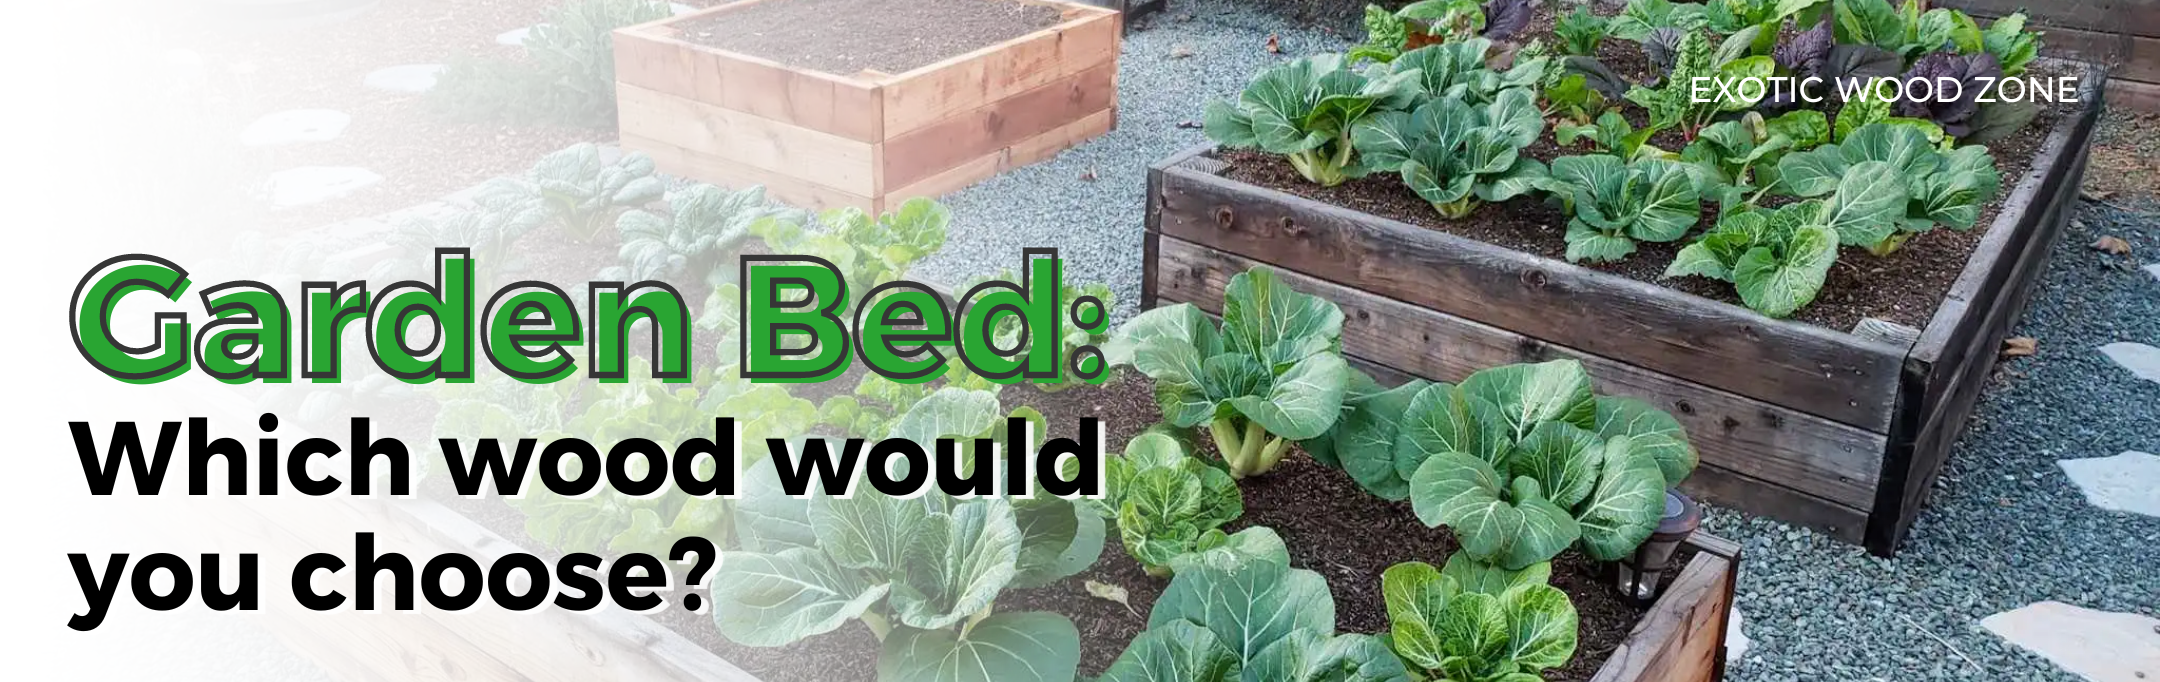 Garden beds: Which wood would you choose?